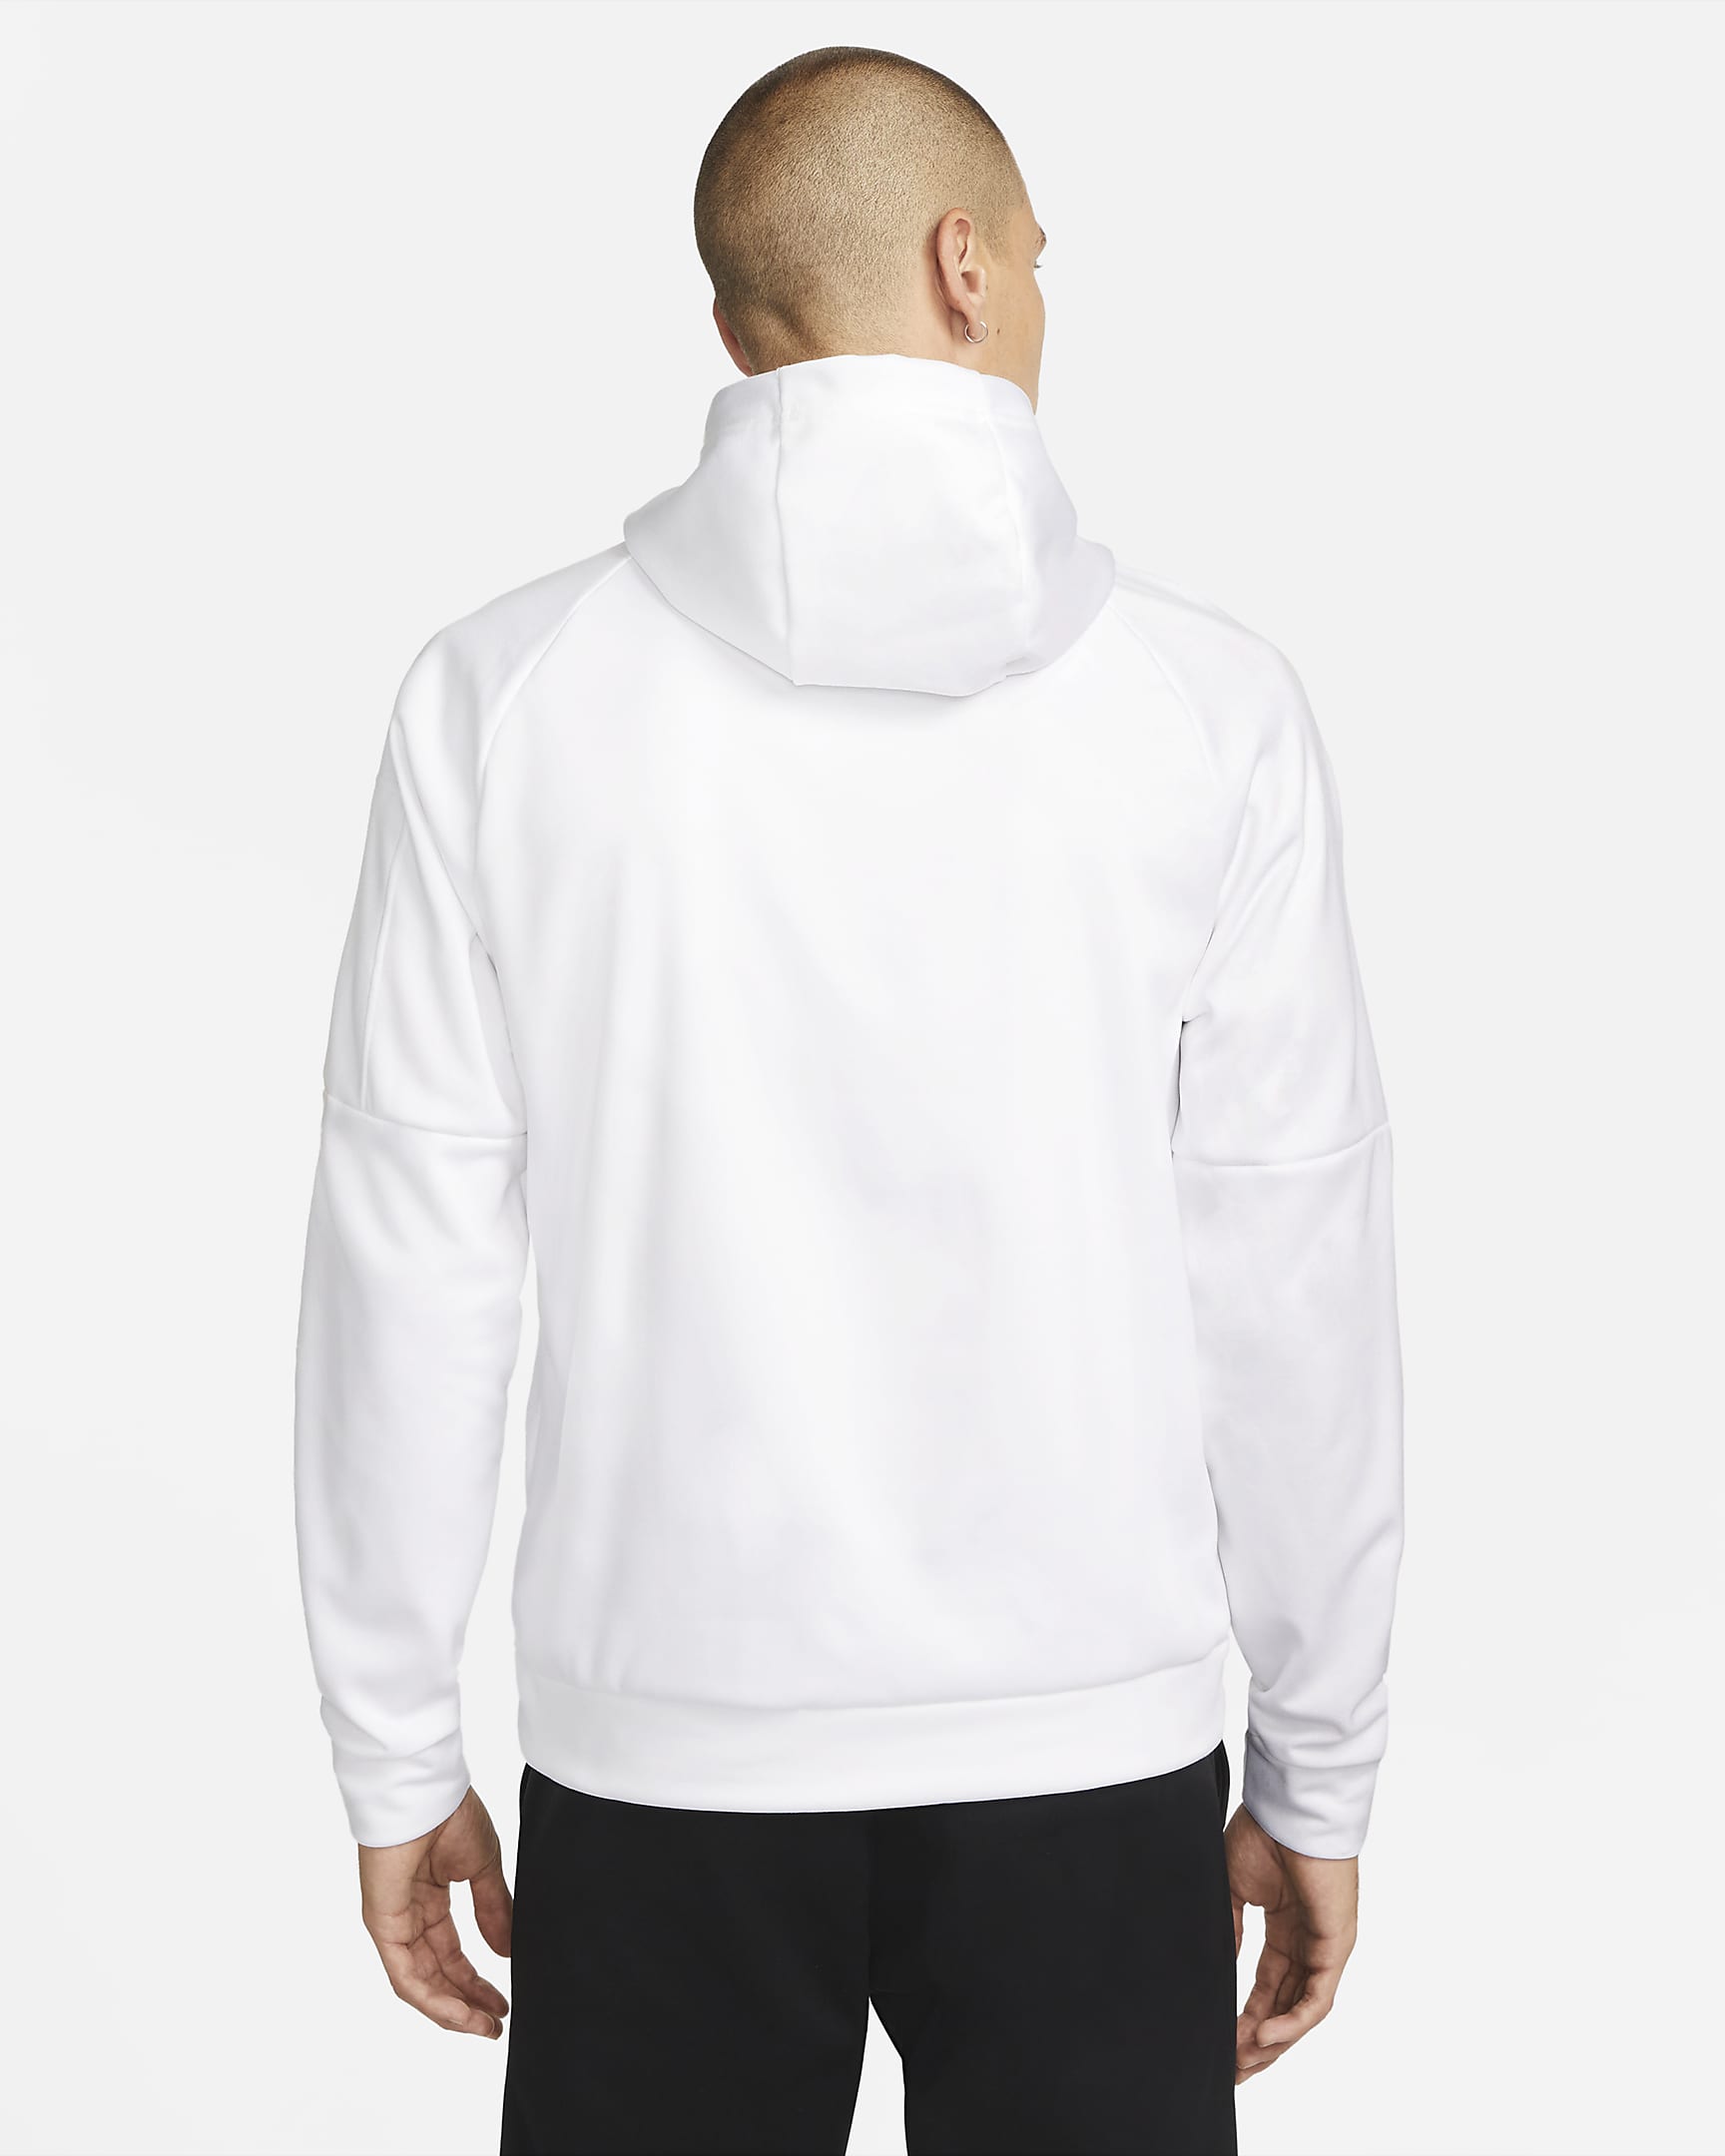 Nike Therma Men's Therma-FIT Hooded Fitness Pullover. Nike.com